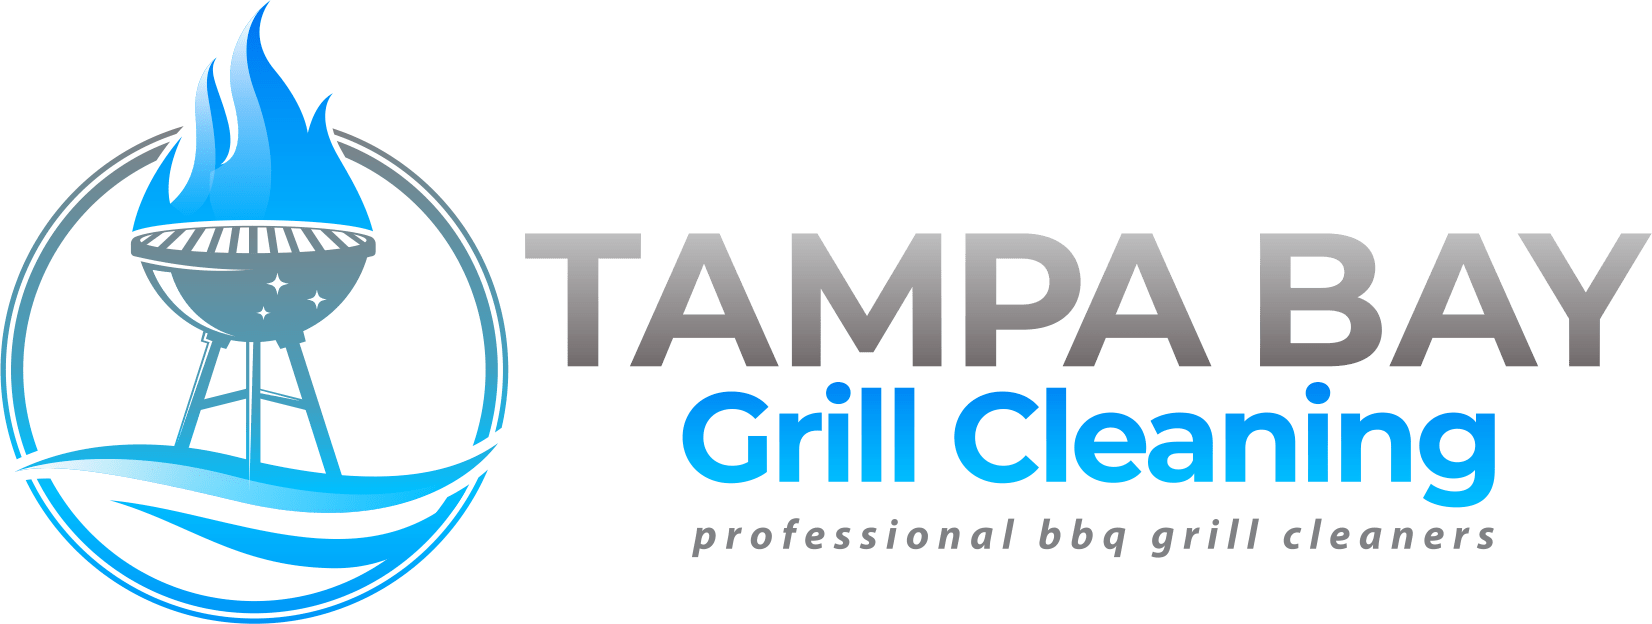 https://tampabaygrillcleaning.com/wp-content/uploads/2020/11/Tampa-Bay-Grill-Cleaning.cdr-1.png